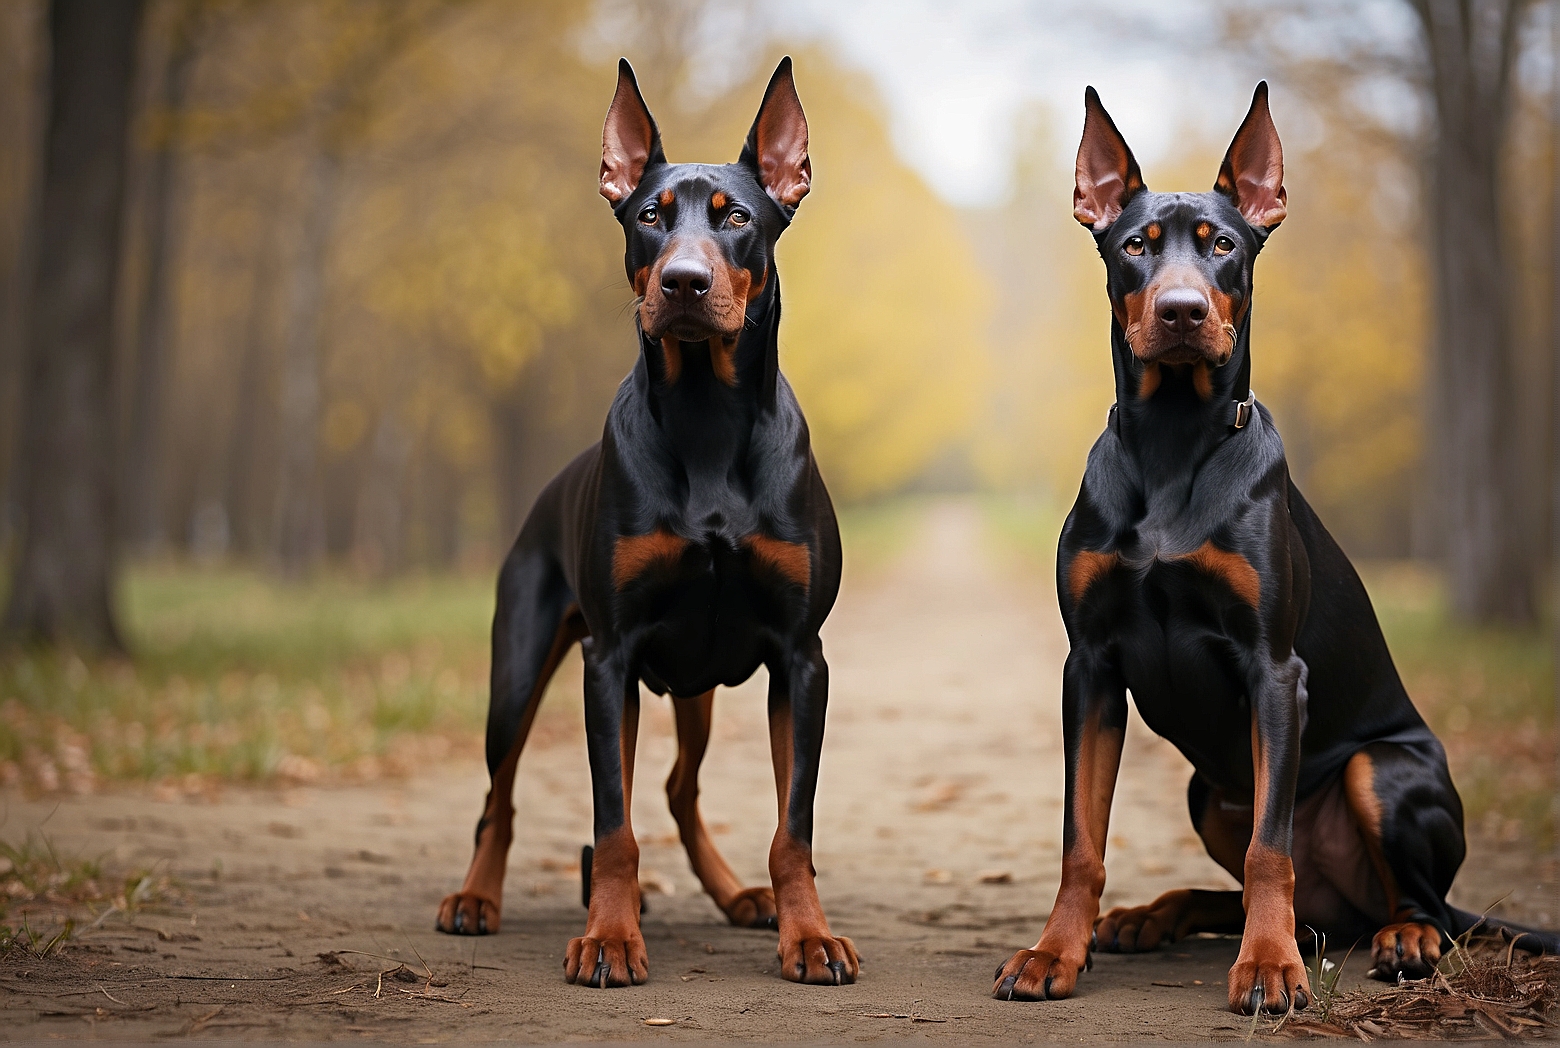 How Much Does a Trained Doberman Cost?